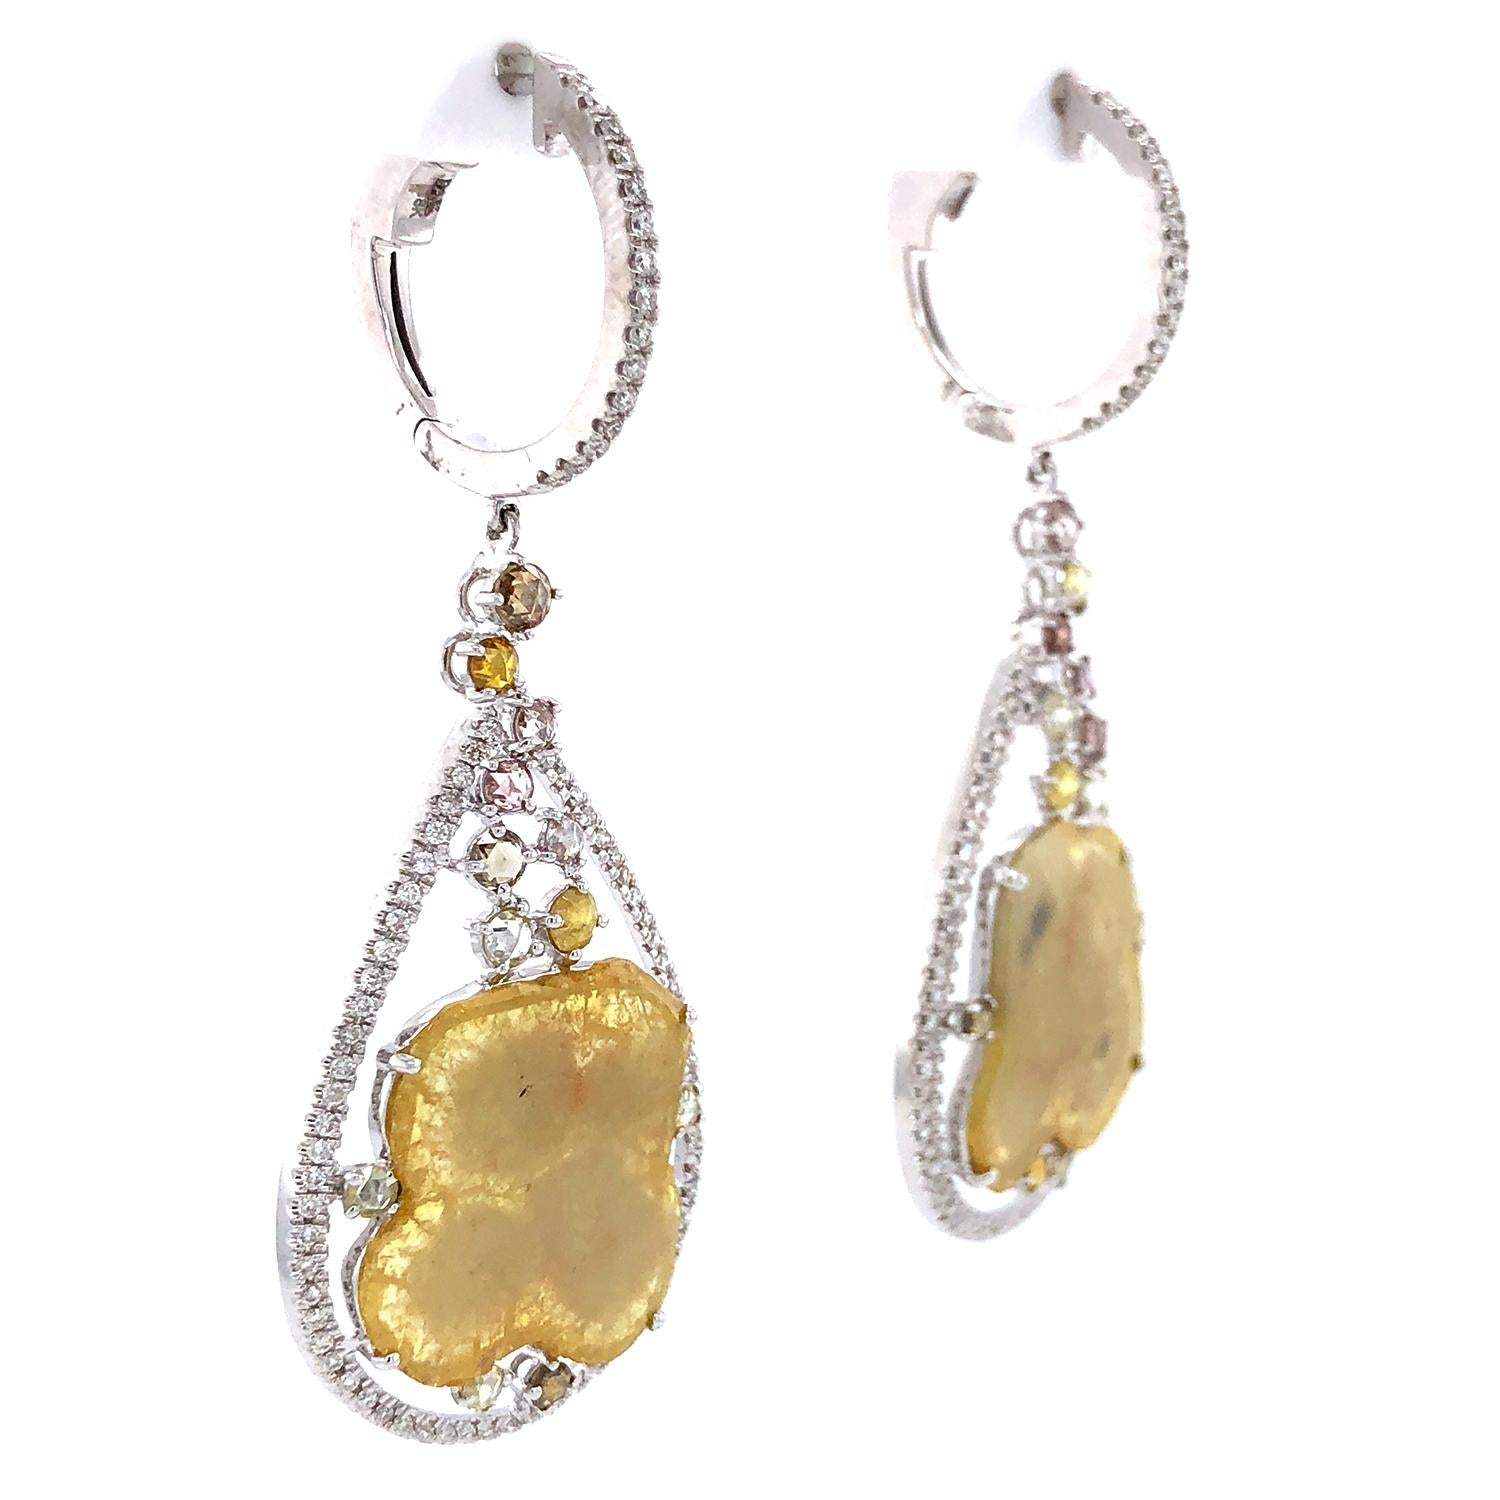 Mixed Cut 18k Gold Sliced Yellow Diamond Earring Caged In Pear Shaped Pave Diamond Setting For Sale